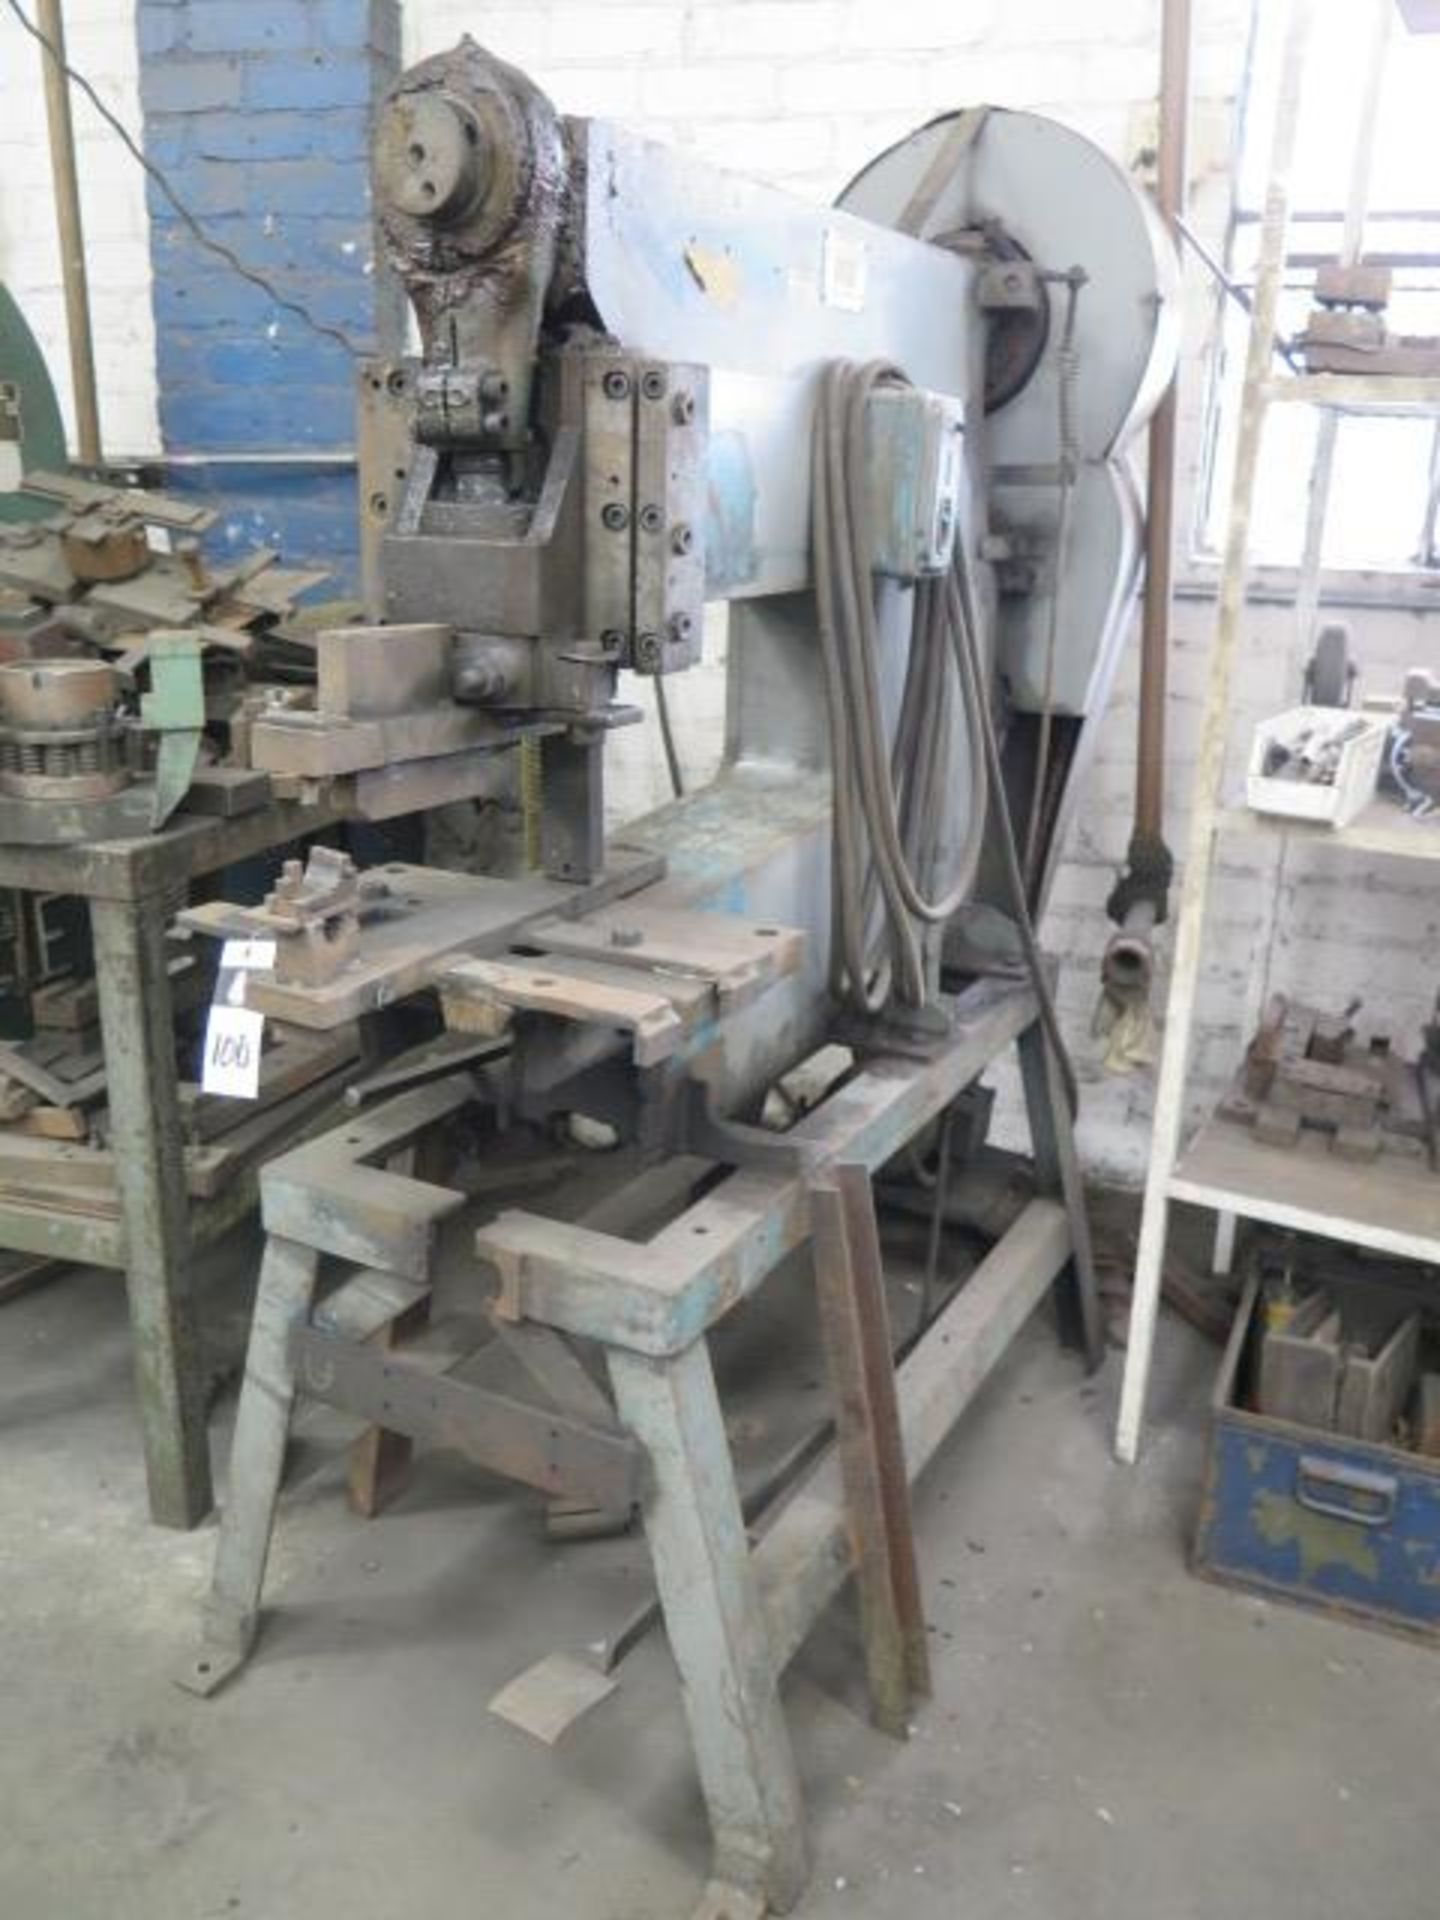 Whitney-Jensen mdl. 231 Punch Press s/n 367-7-62 (FOR PARTS ONLY) (SOLD AS-IS - NO WARRANTY